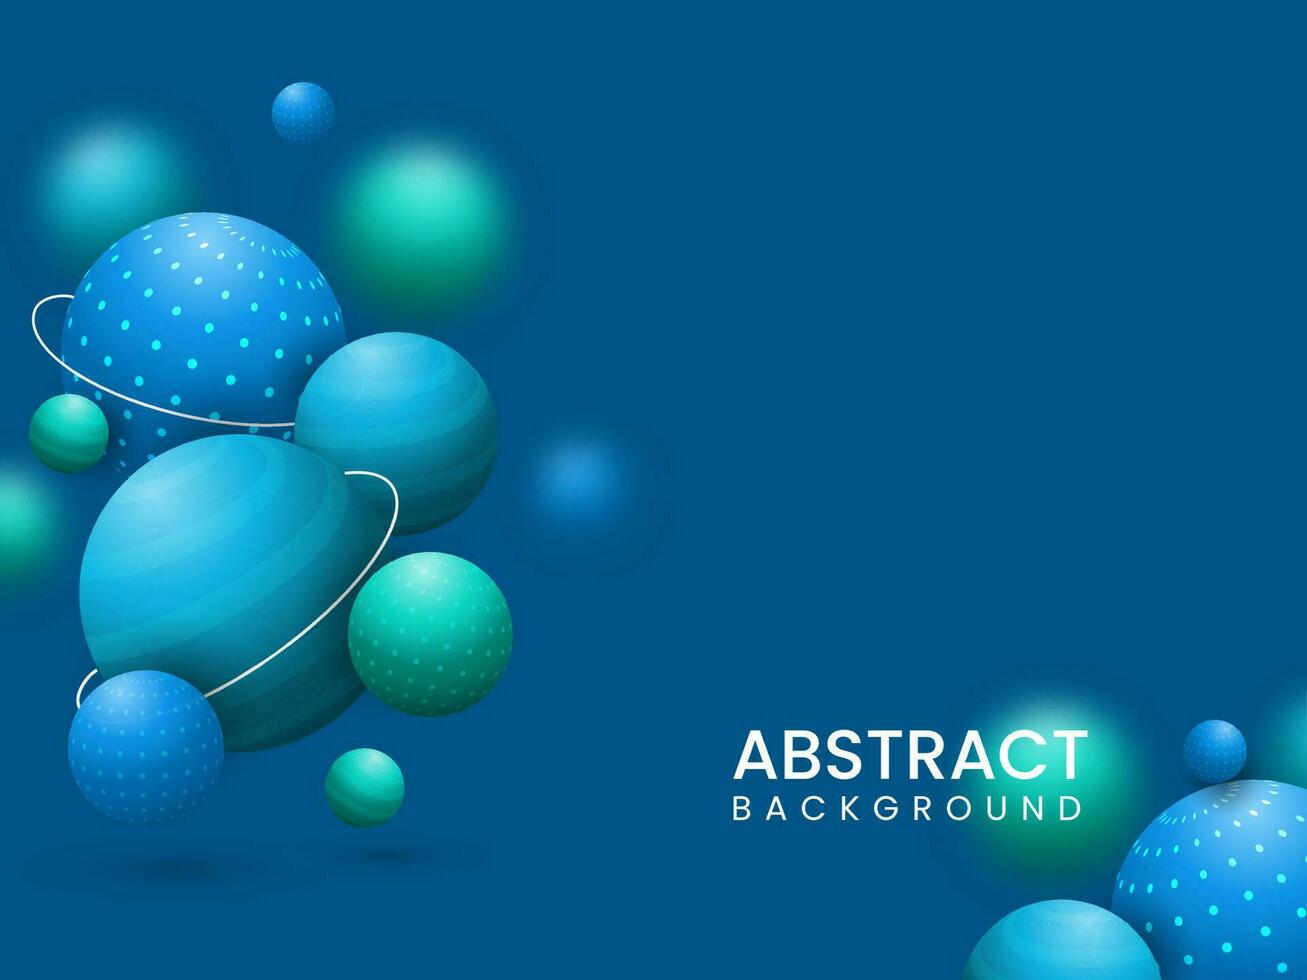 3D Rendering Balls Or Sphere Decorated On Abstract Blue Background. vector